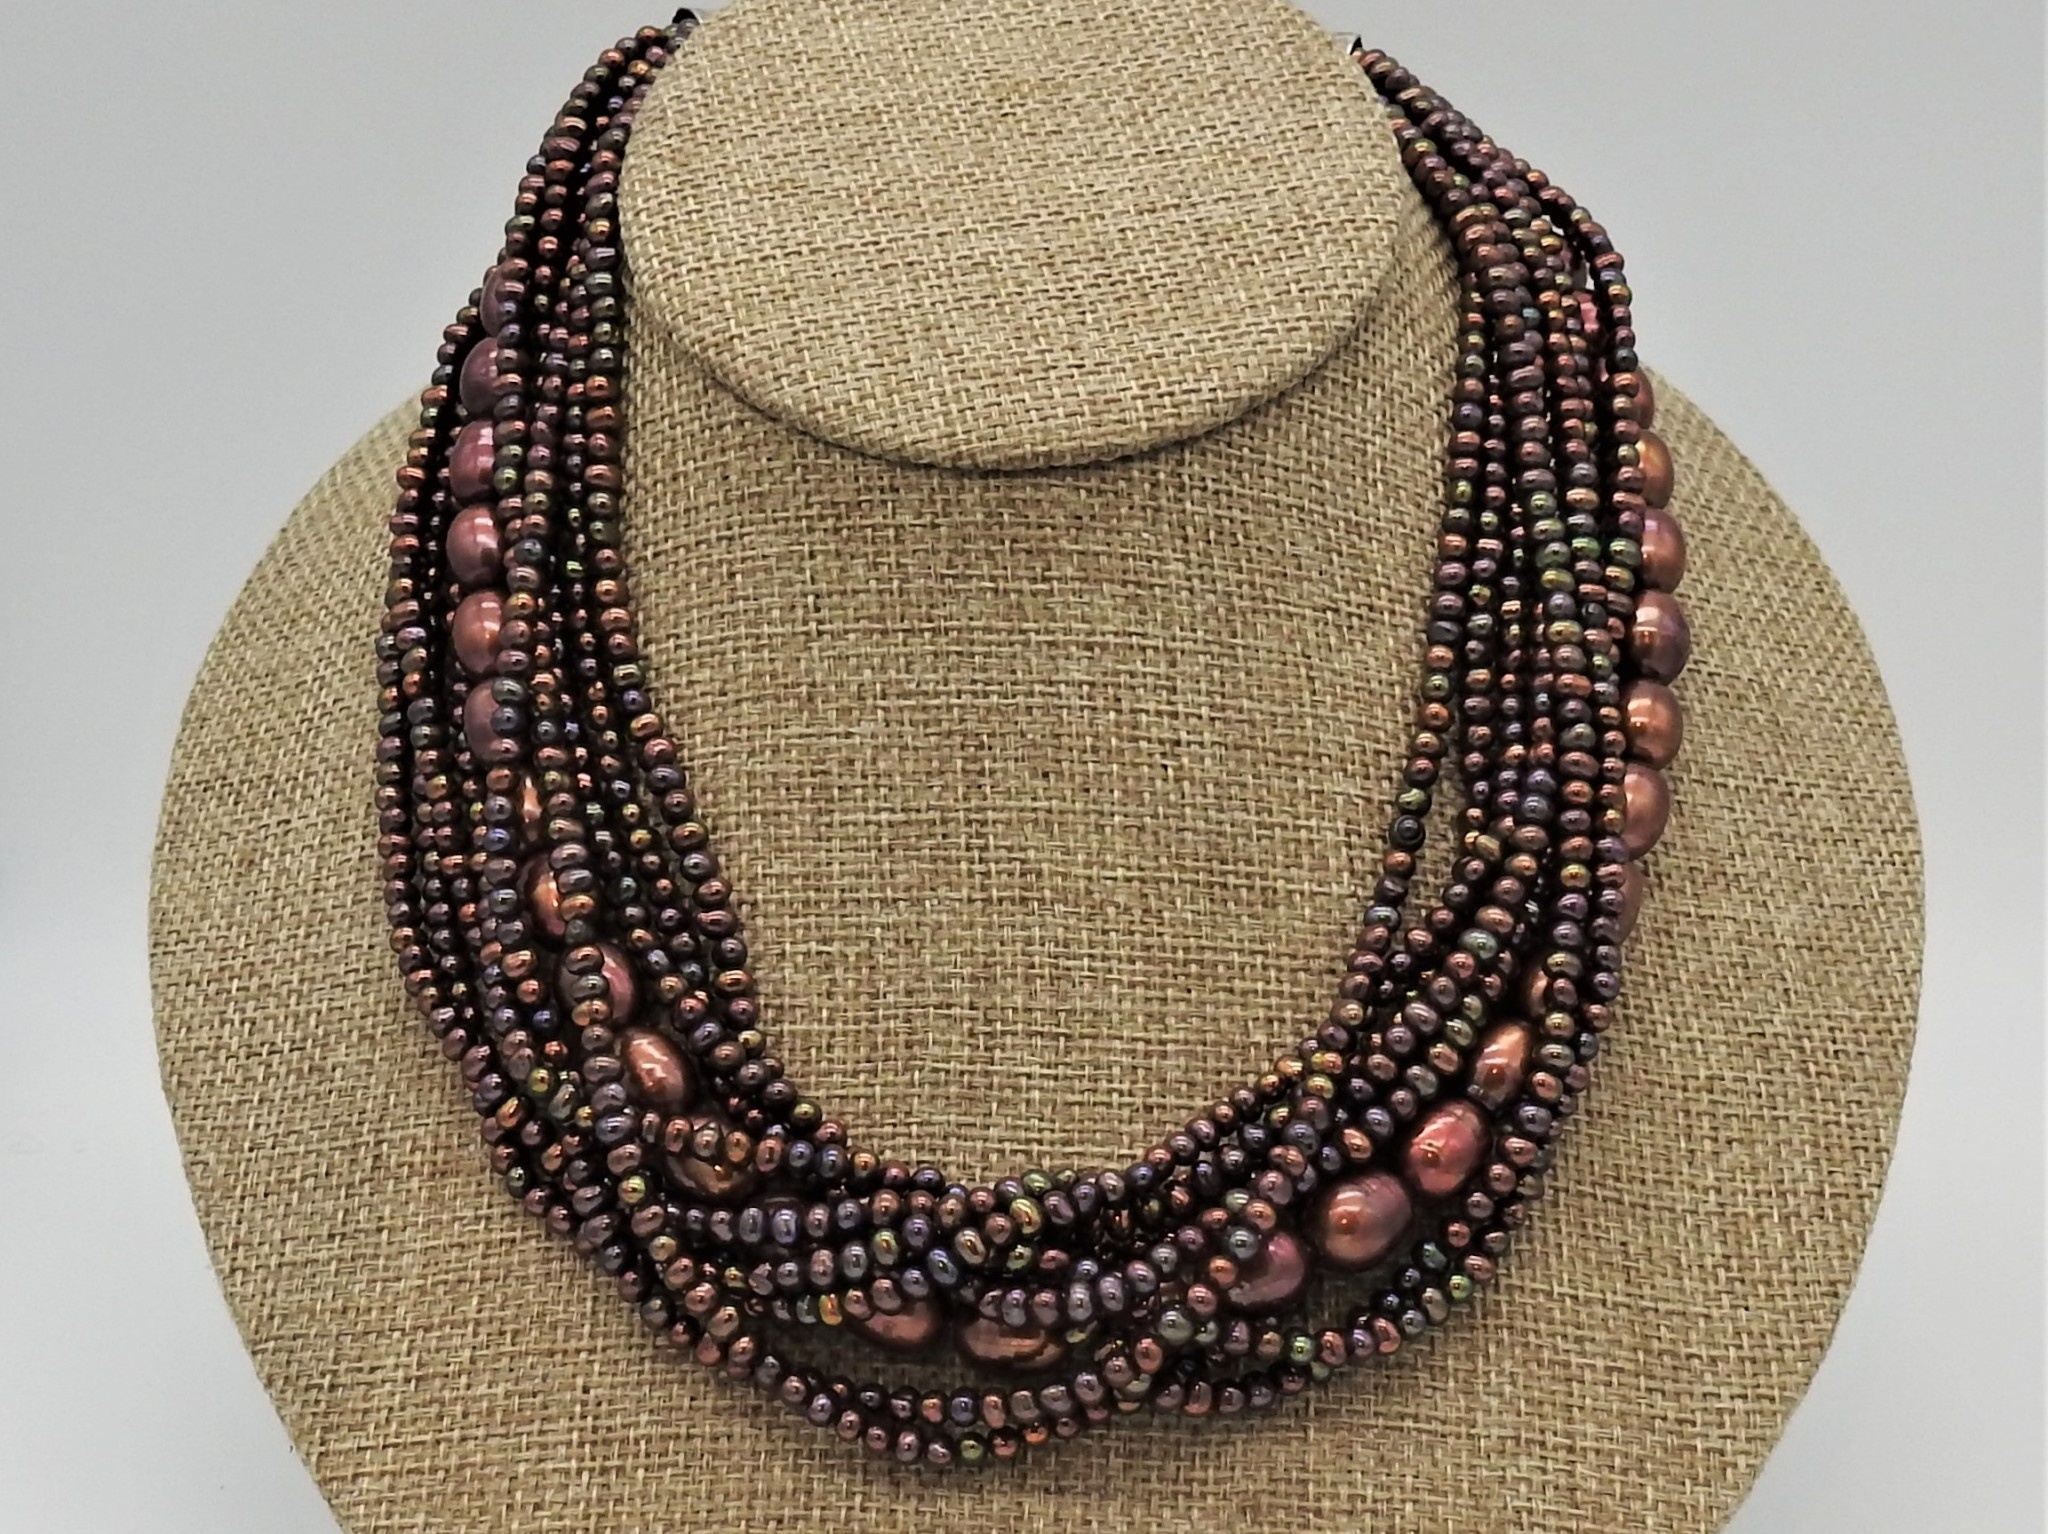 Pam Springall PS-N26C 9 Strnd Copper Pearls